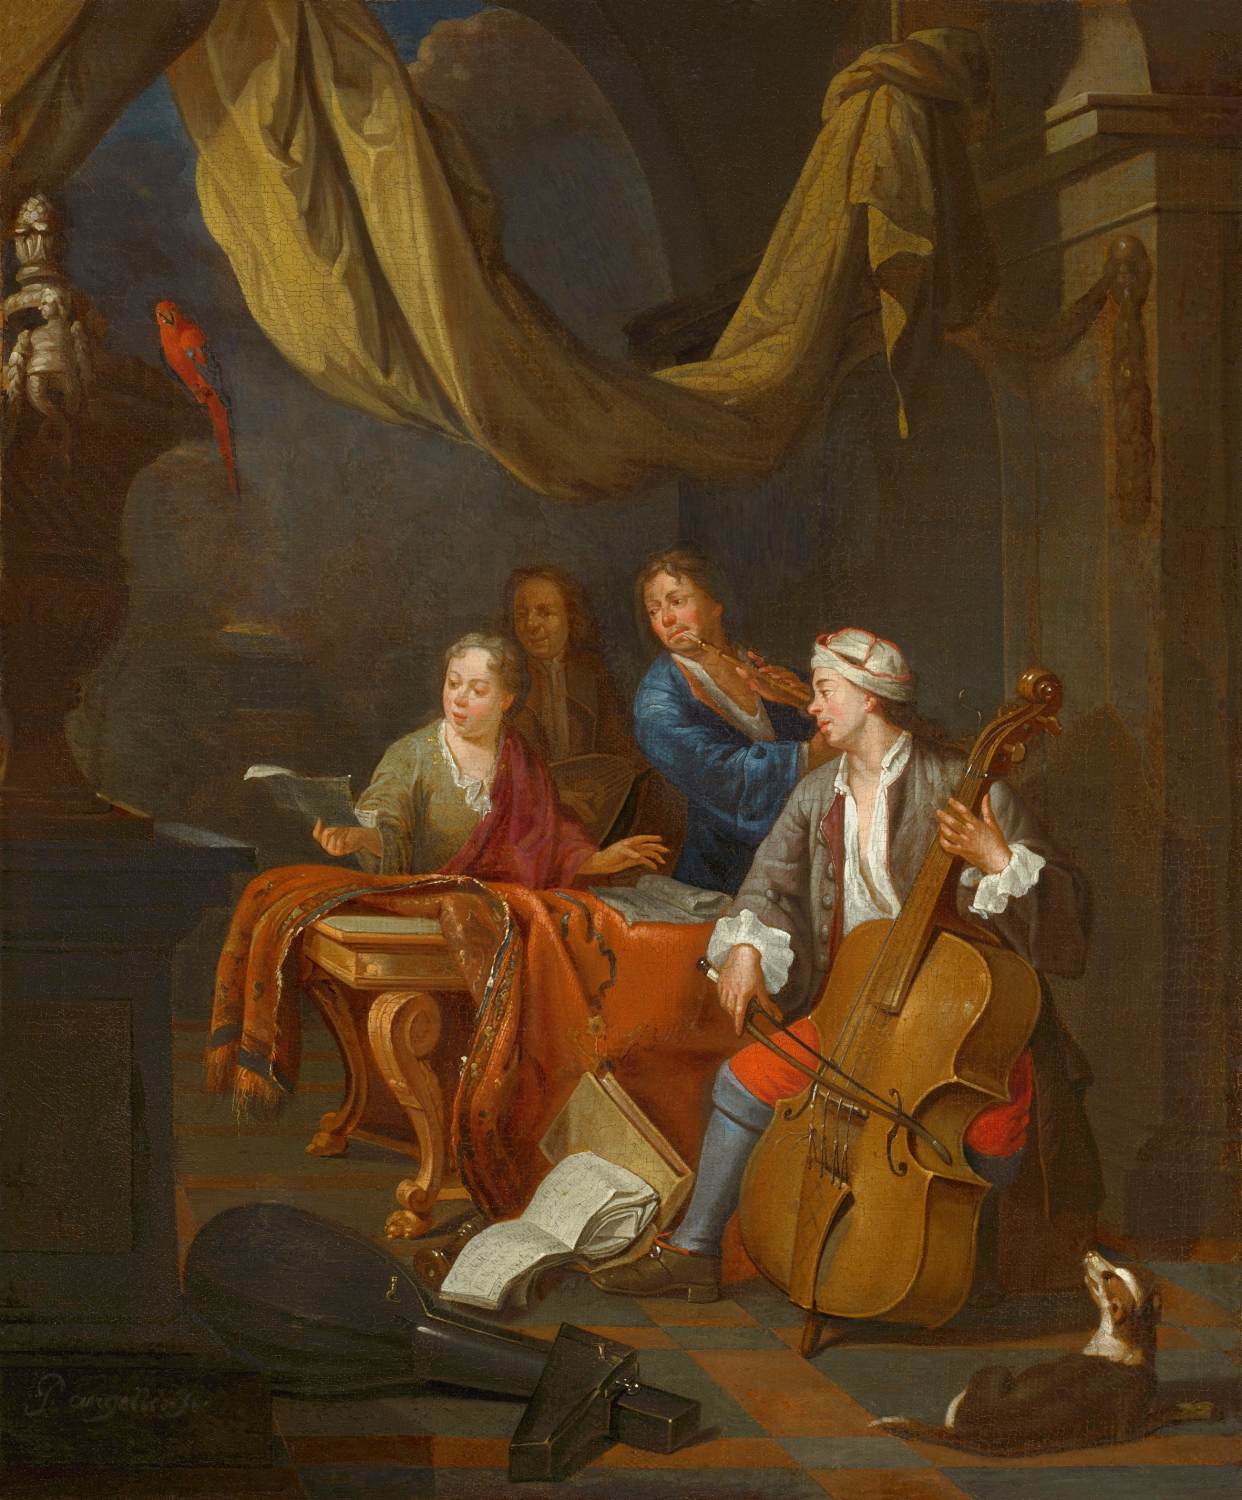 Musical Company in an Elegant Interior